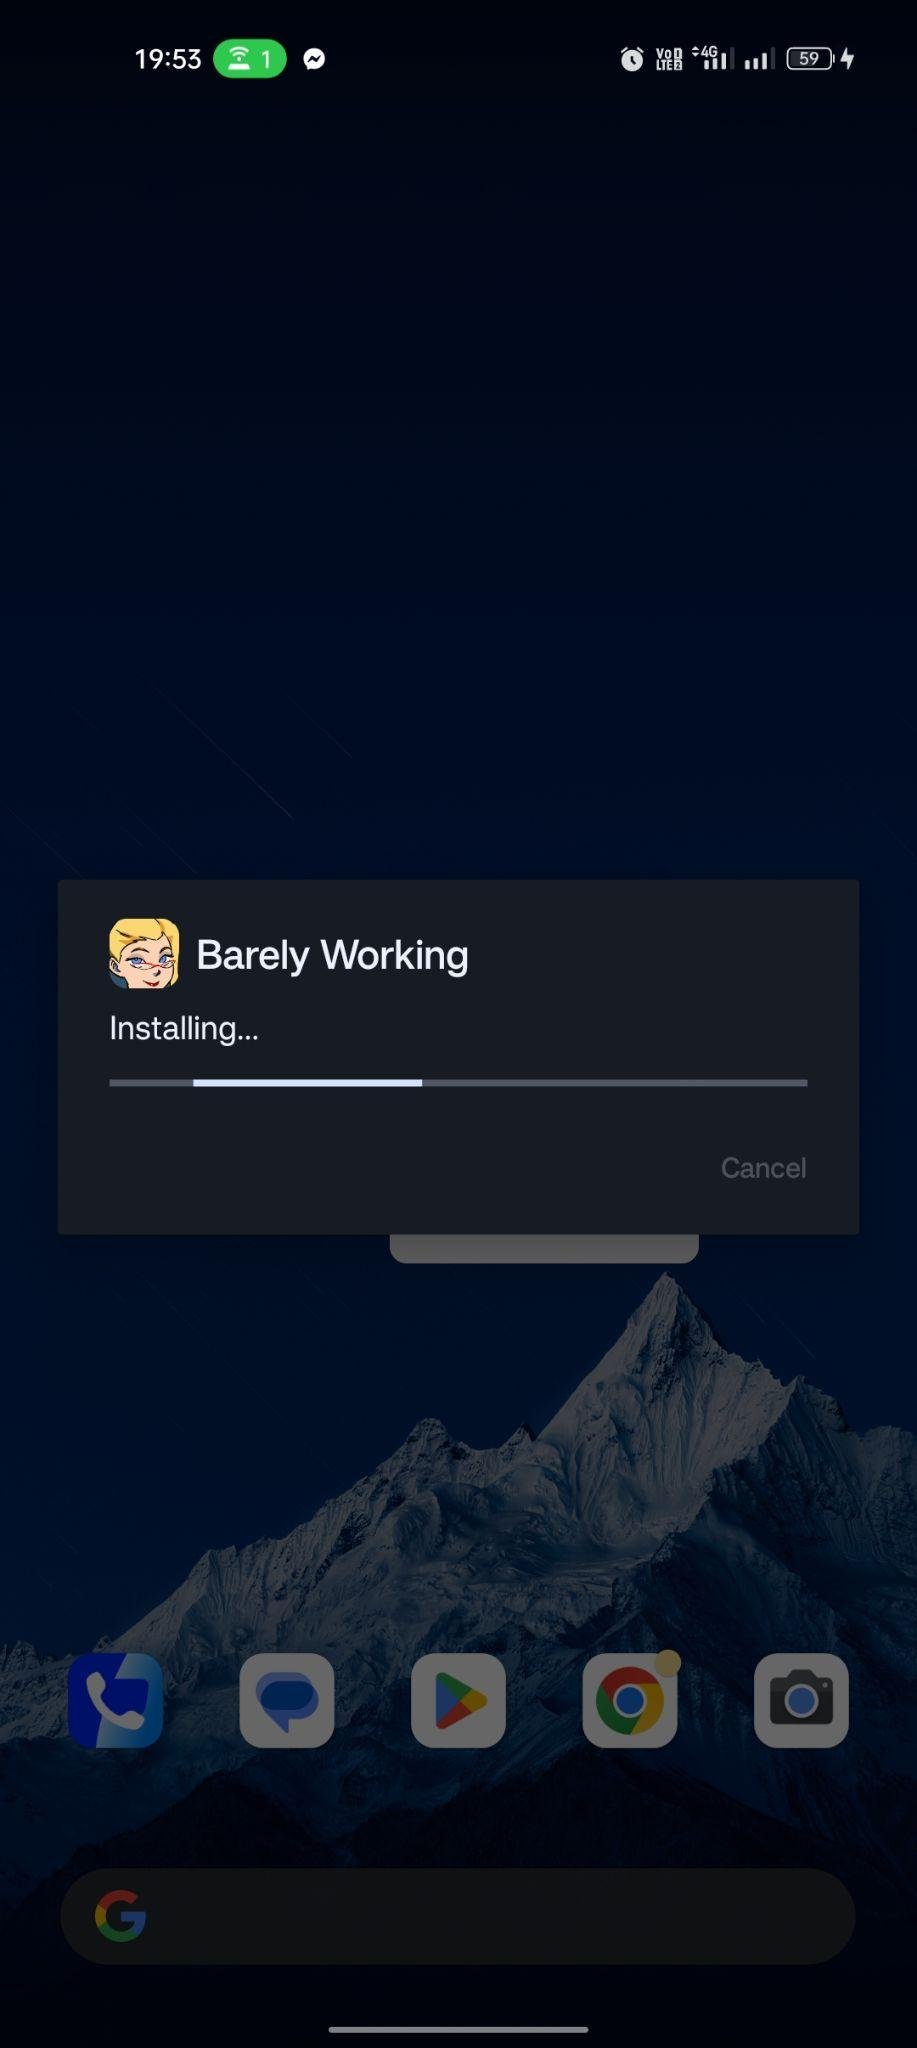 Barely Working apk installing